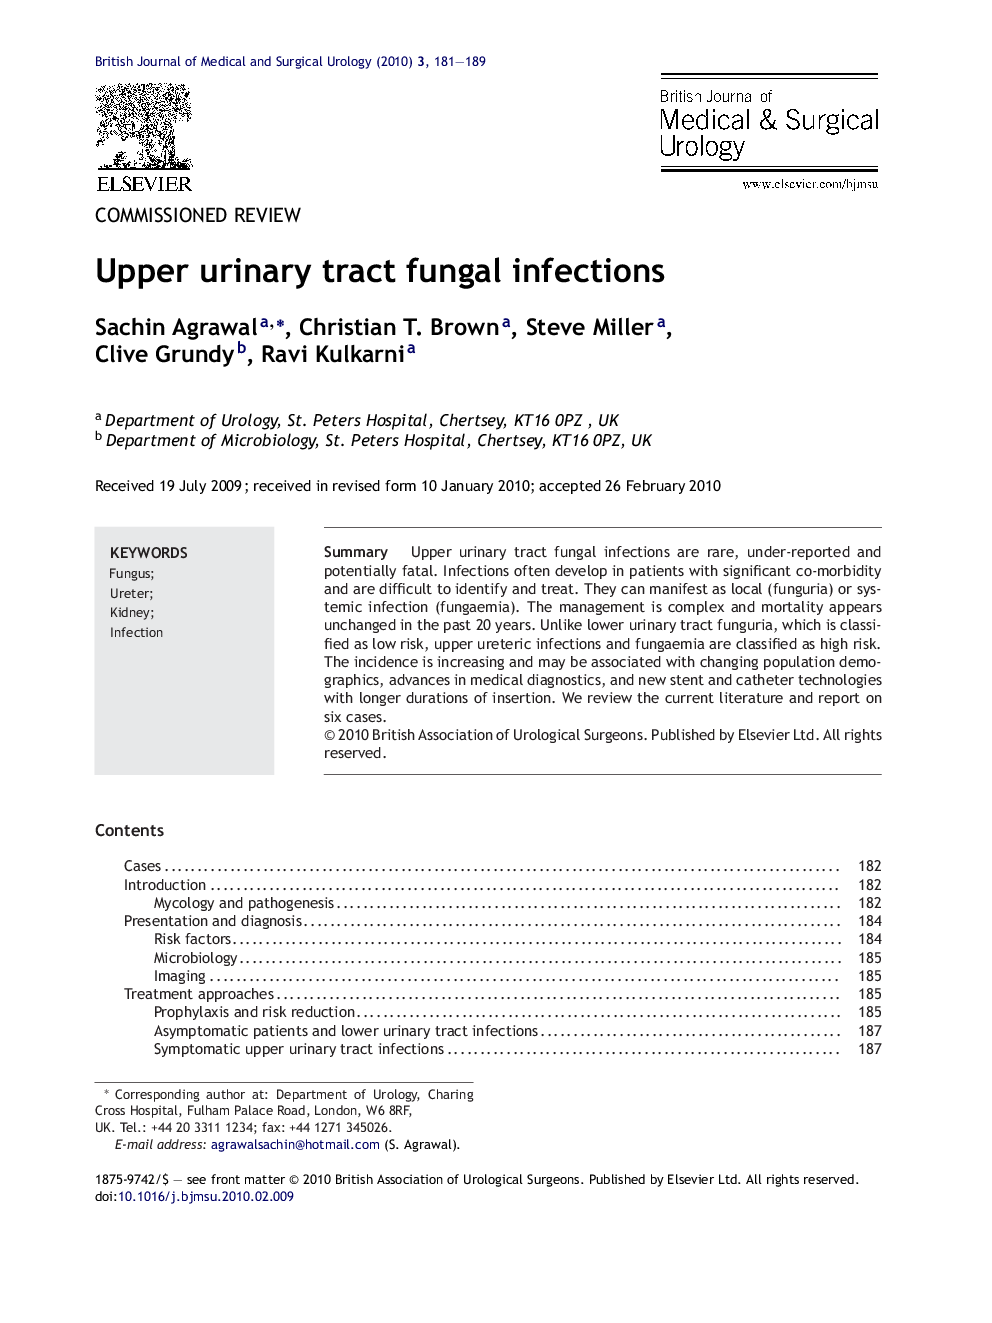 Upper urinary tract fungal infections